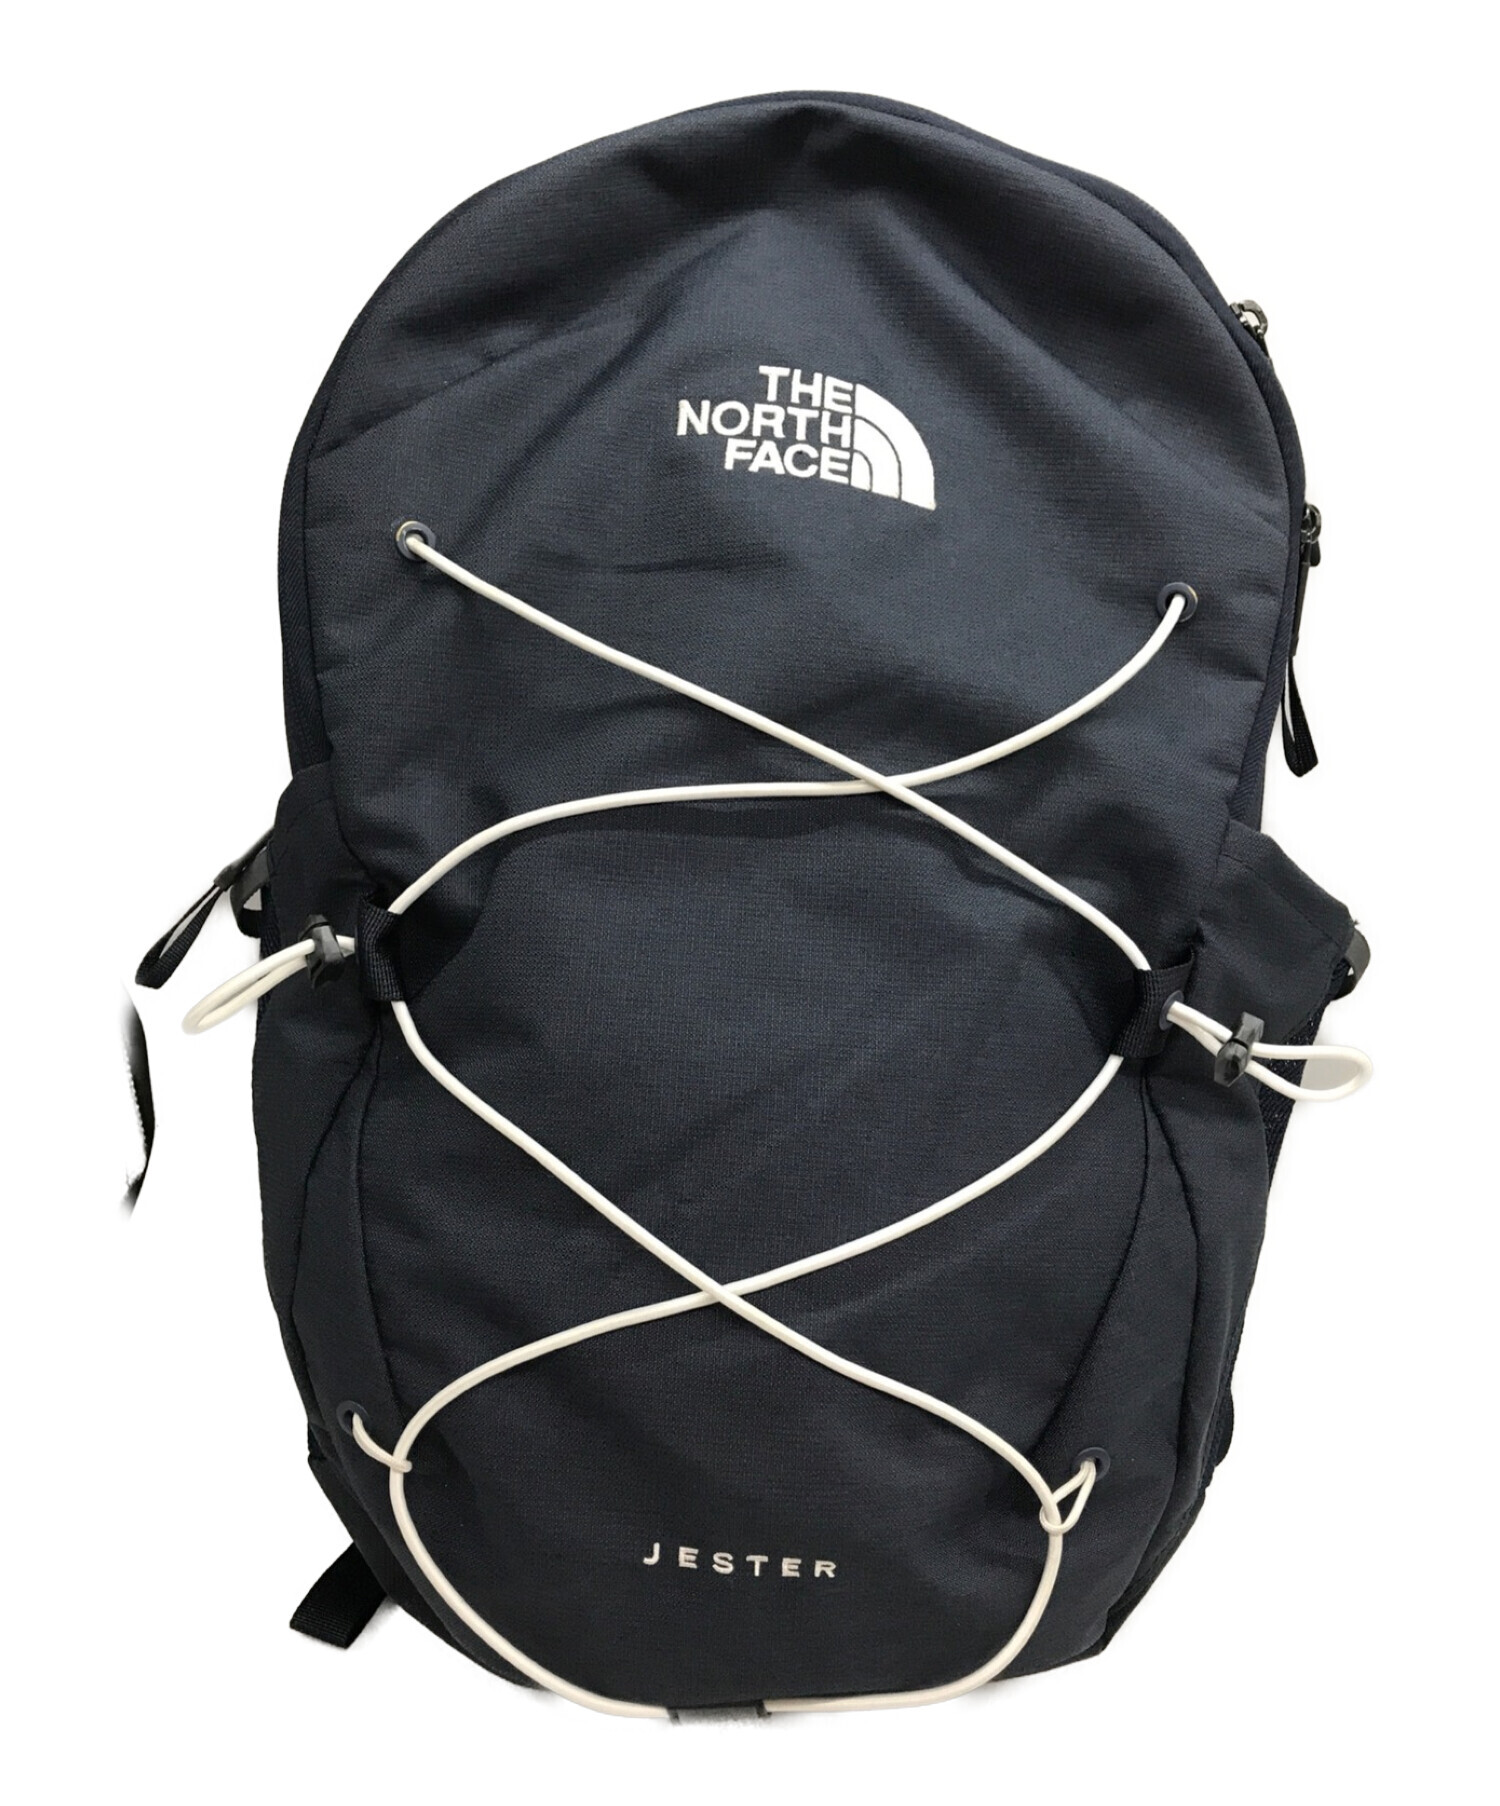 THE NORTH FACE JESTER リュックサック バックパック 紺色